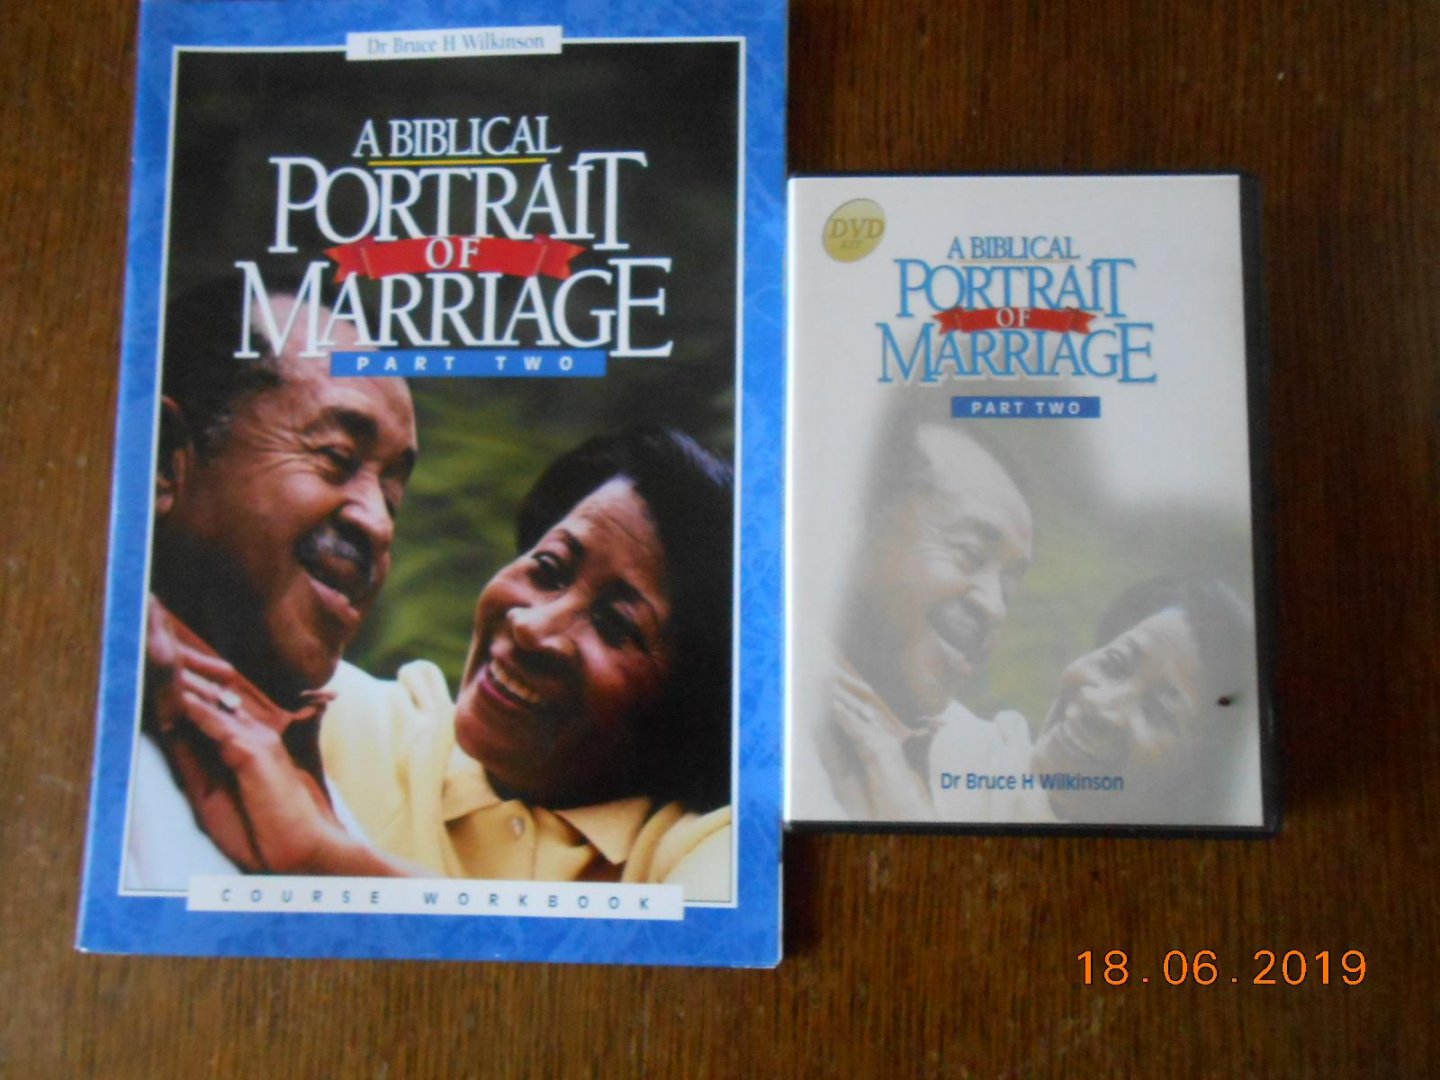 Dr Bruce H Wilkinson - A biblical Portrait of Marriage part two  workbook + DVD's 3